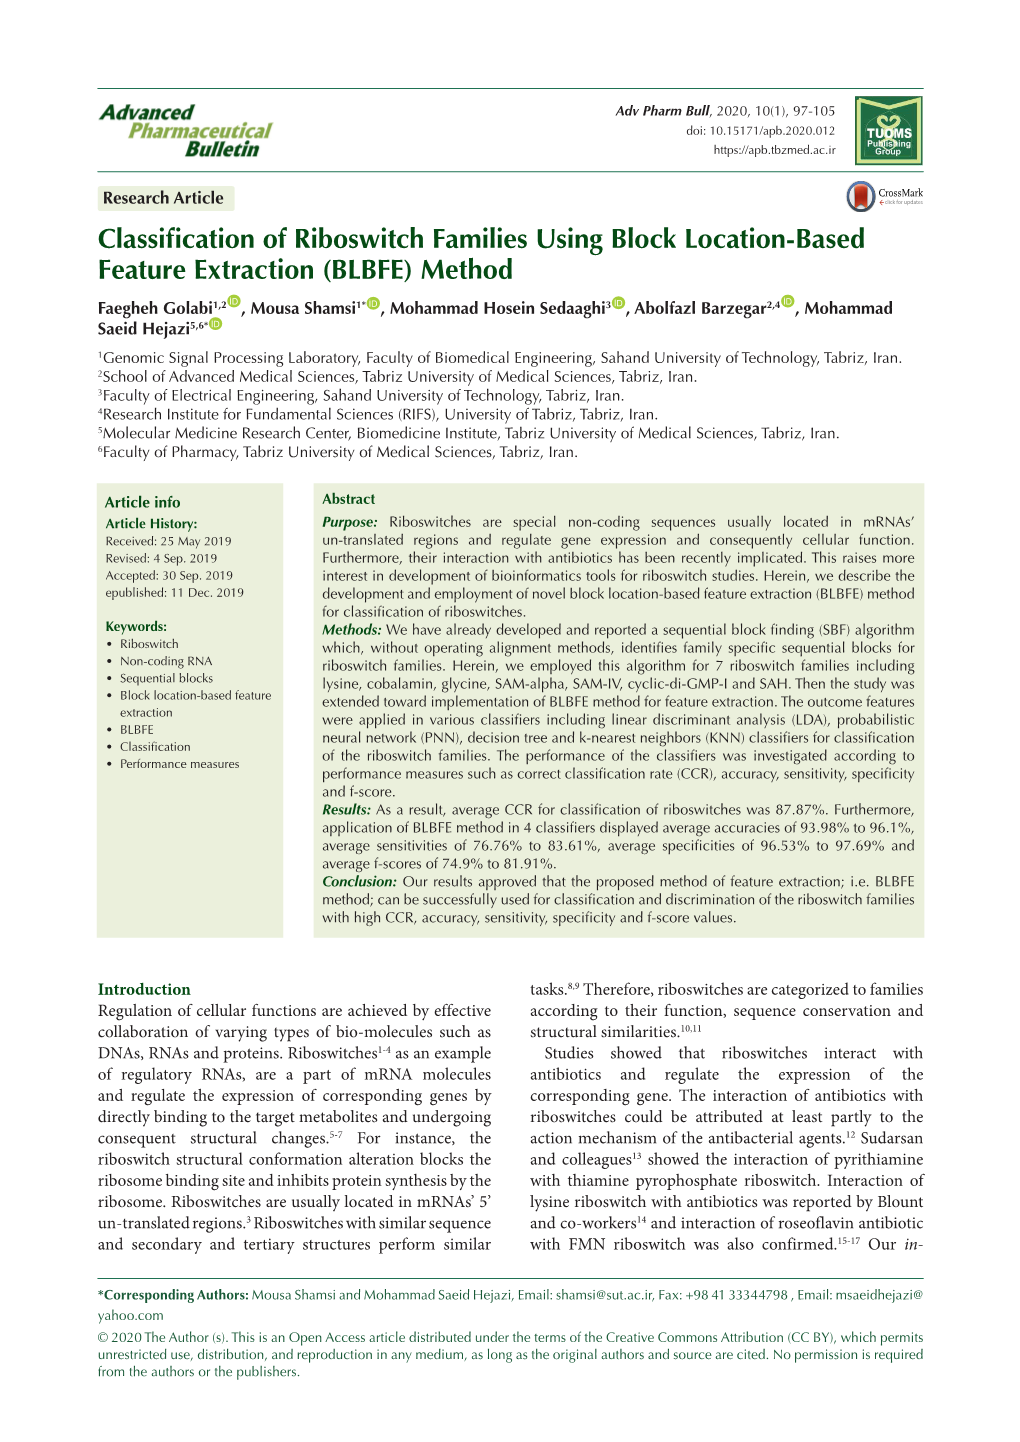 Classification of Riboswitch Families Using Block Location-Based Feature Extraction